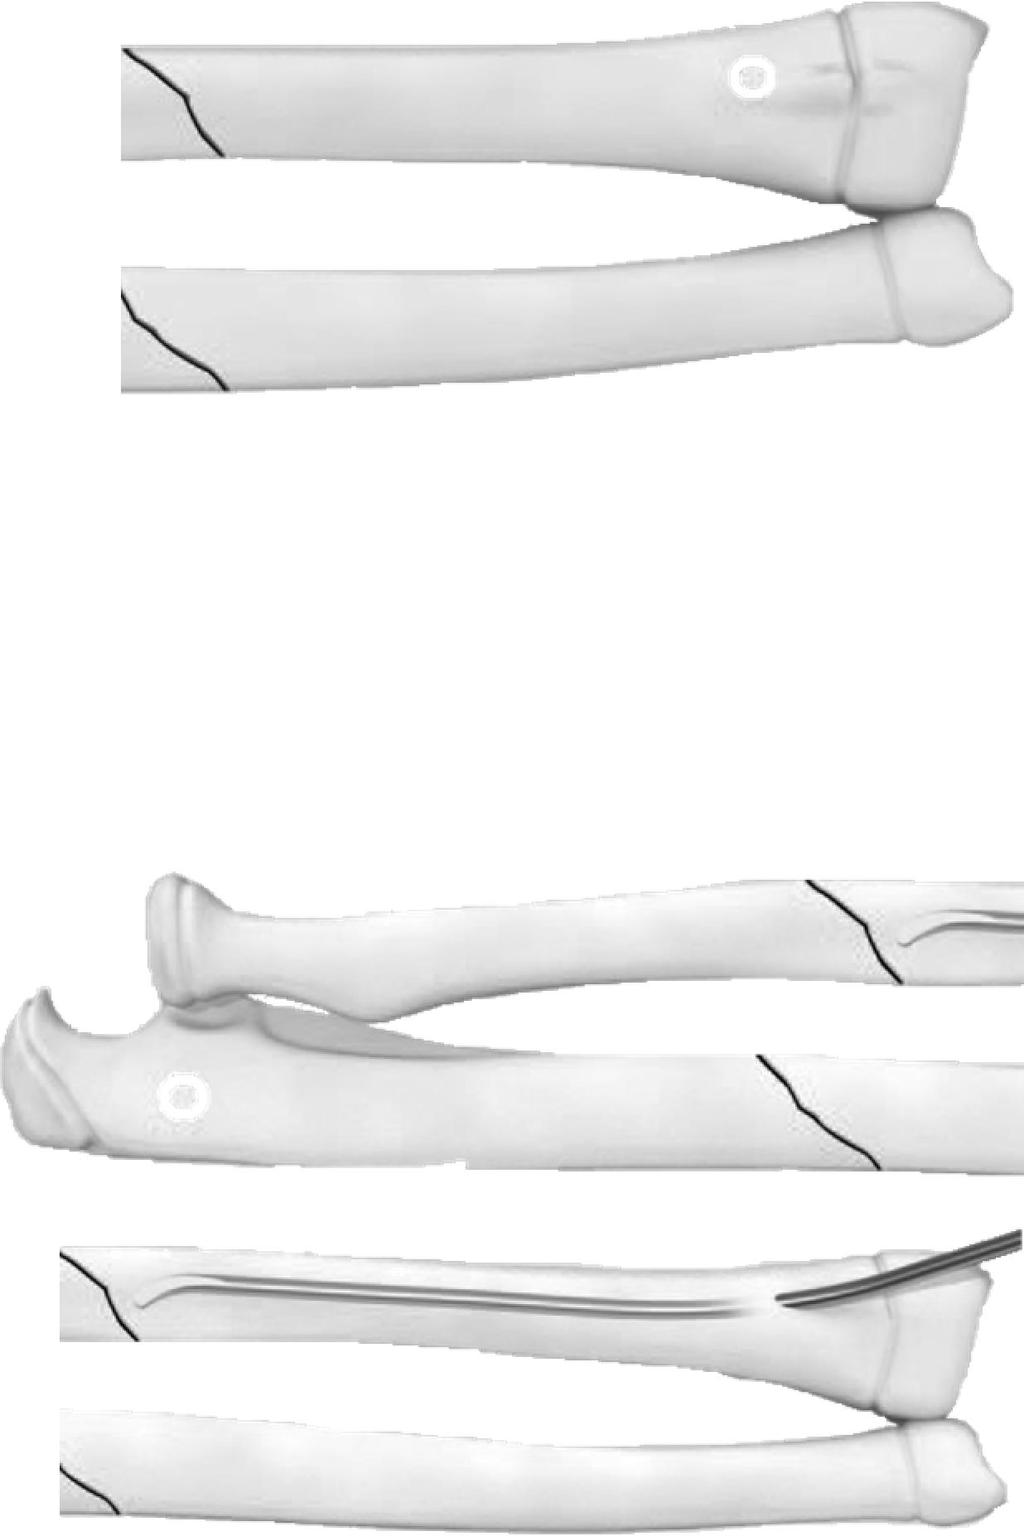 SURGICAL TECHNIQUE FOR PEDİATRİC FOREARM FRACTURES Forearm fractures in children typically require a single nail inserted in each bone.